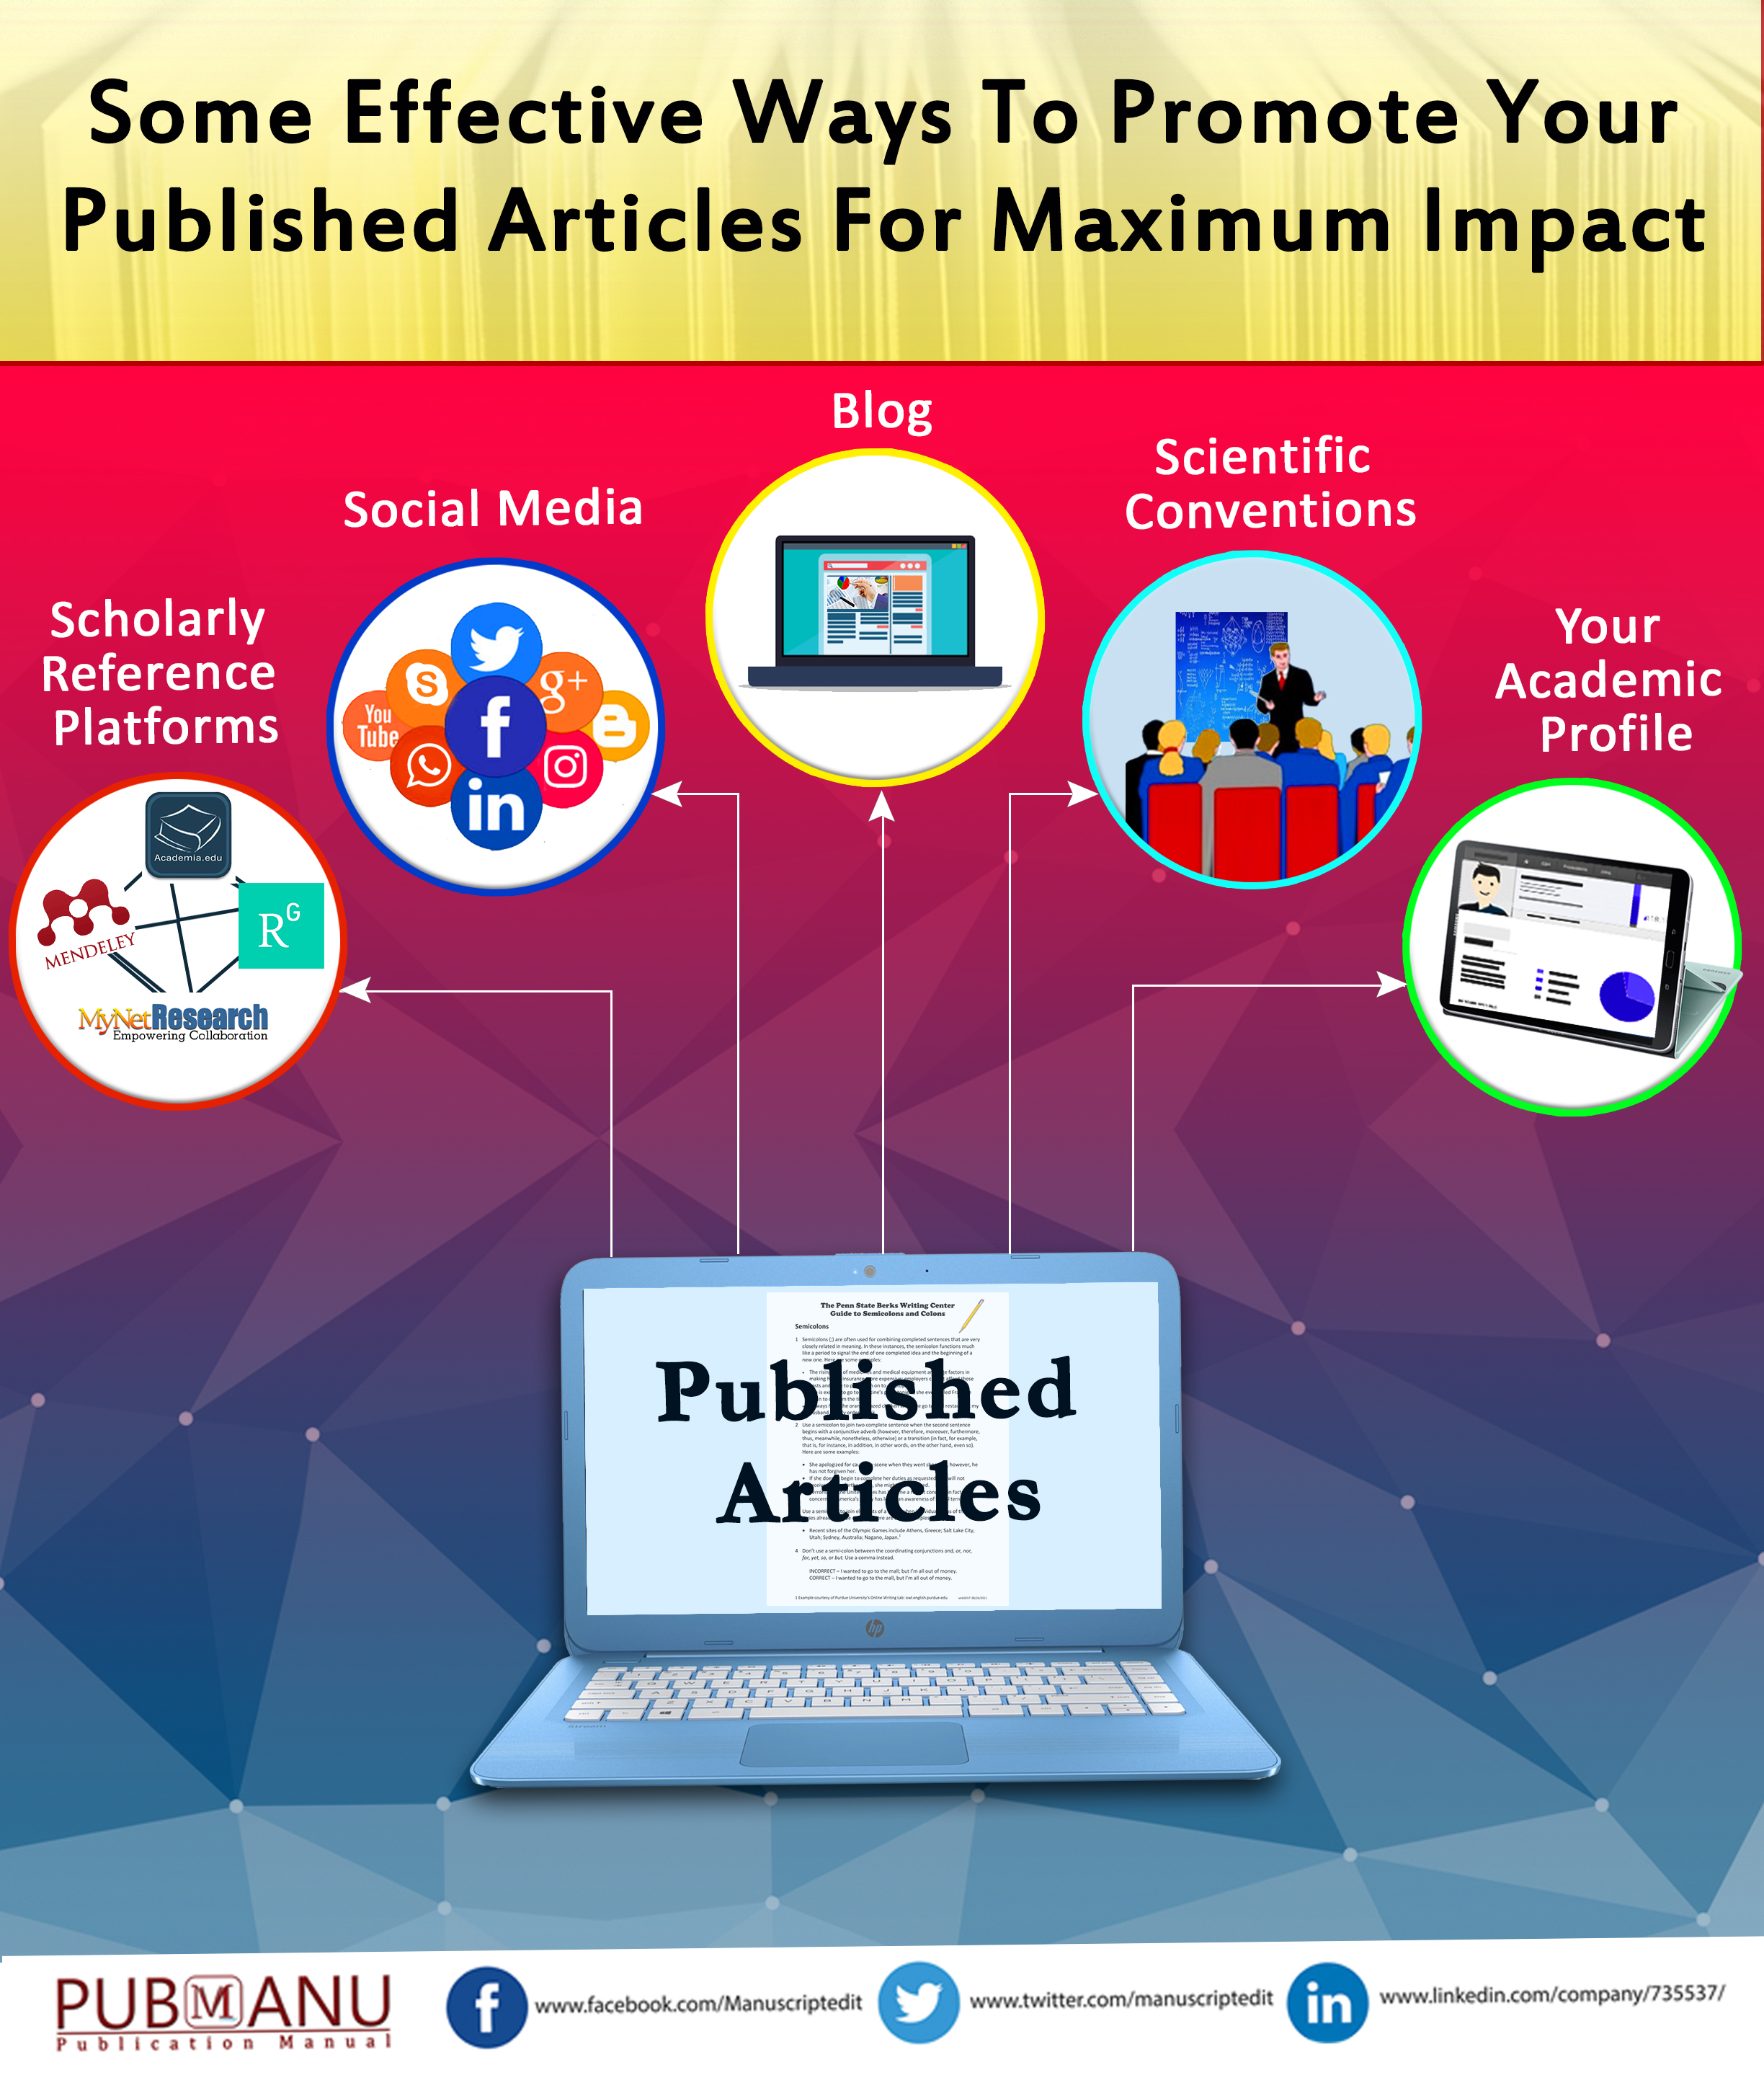 How To Promote Your Published Articles For Maximum Impact